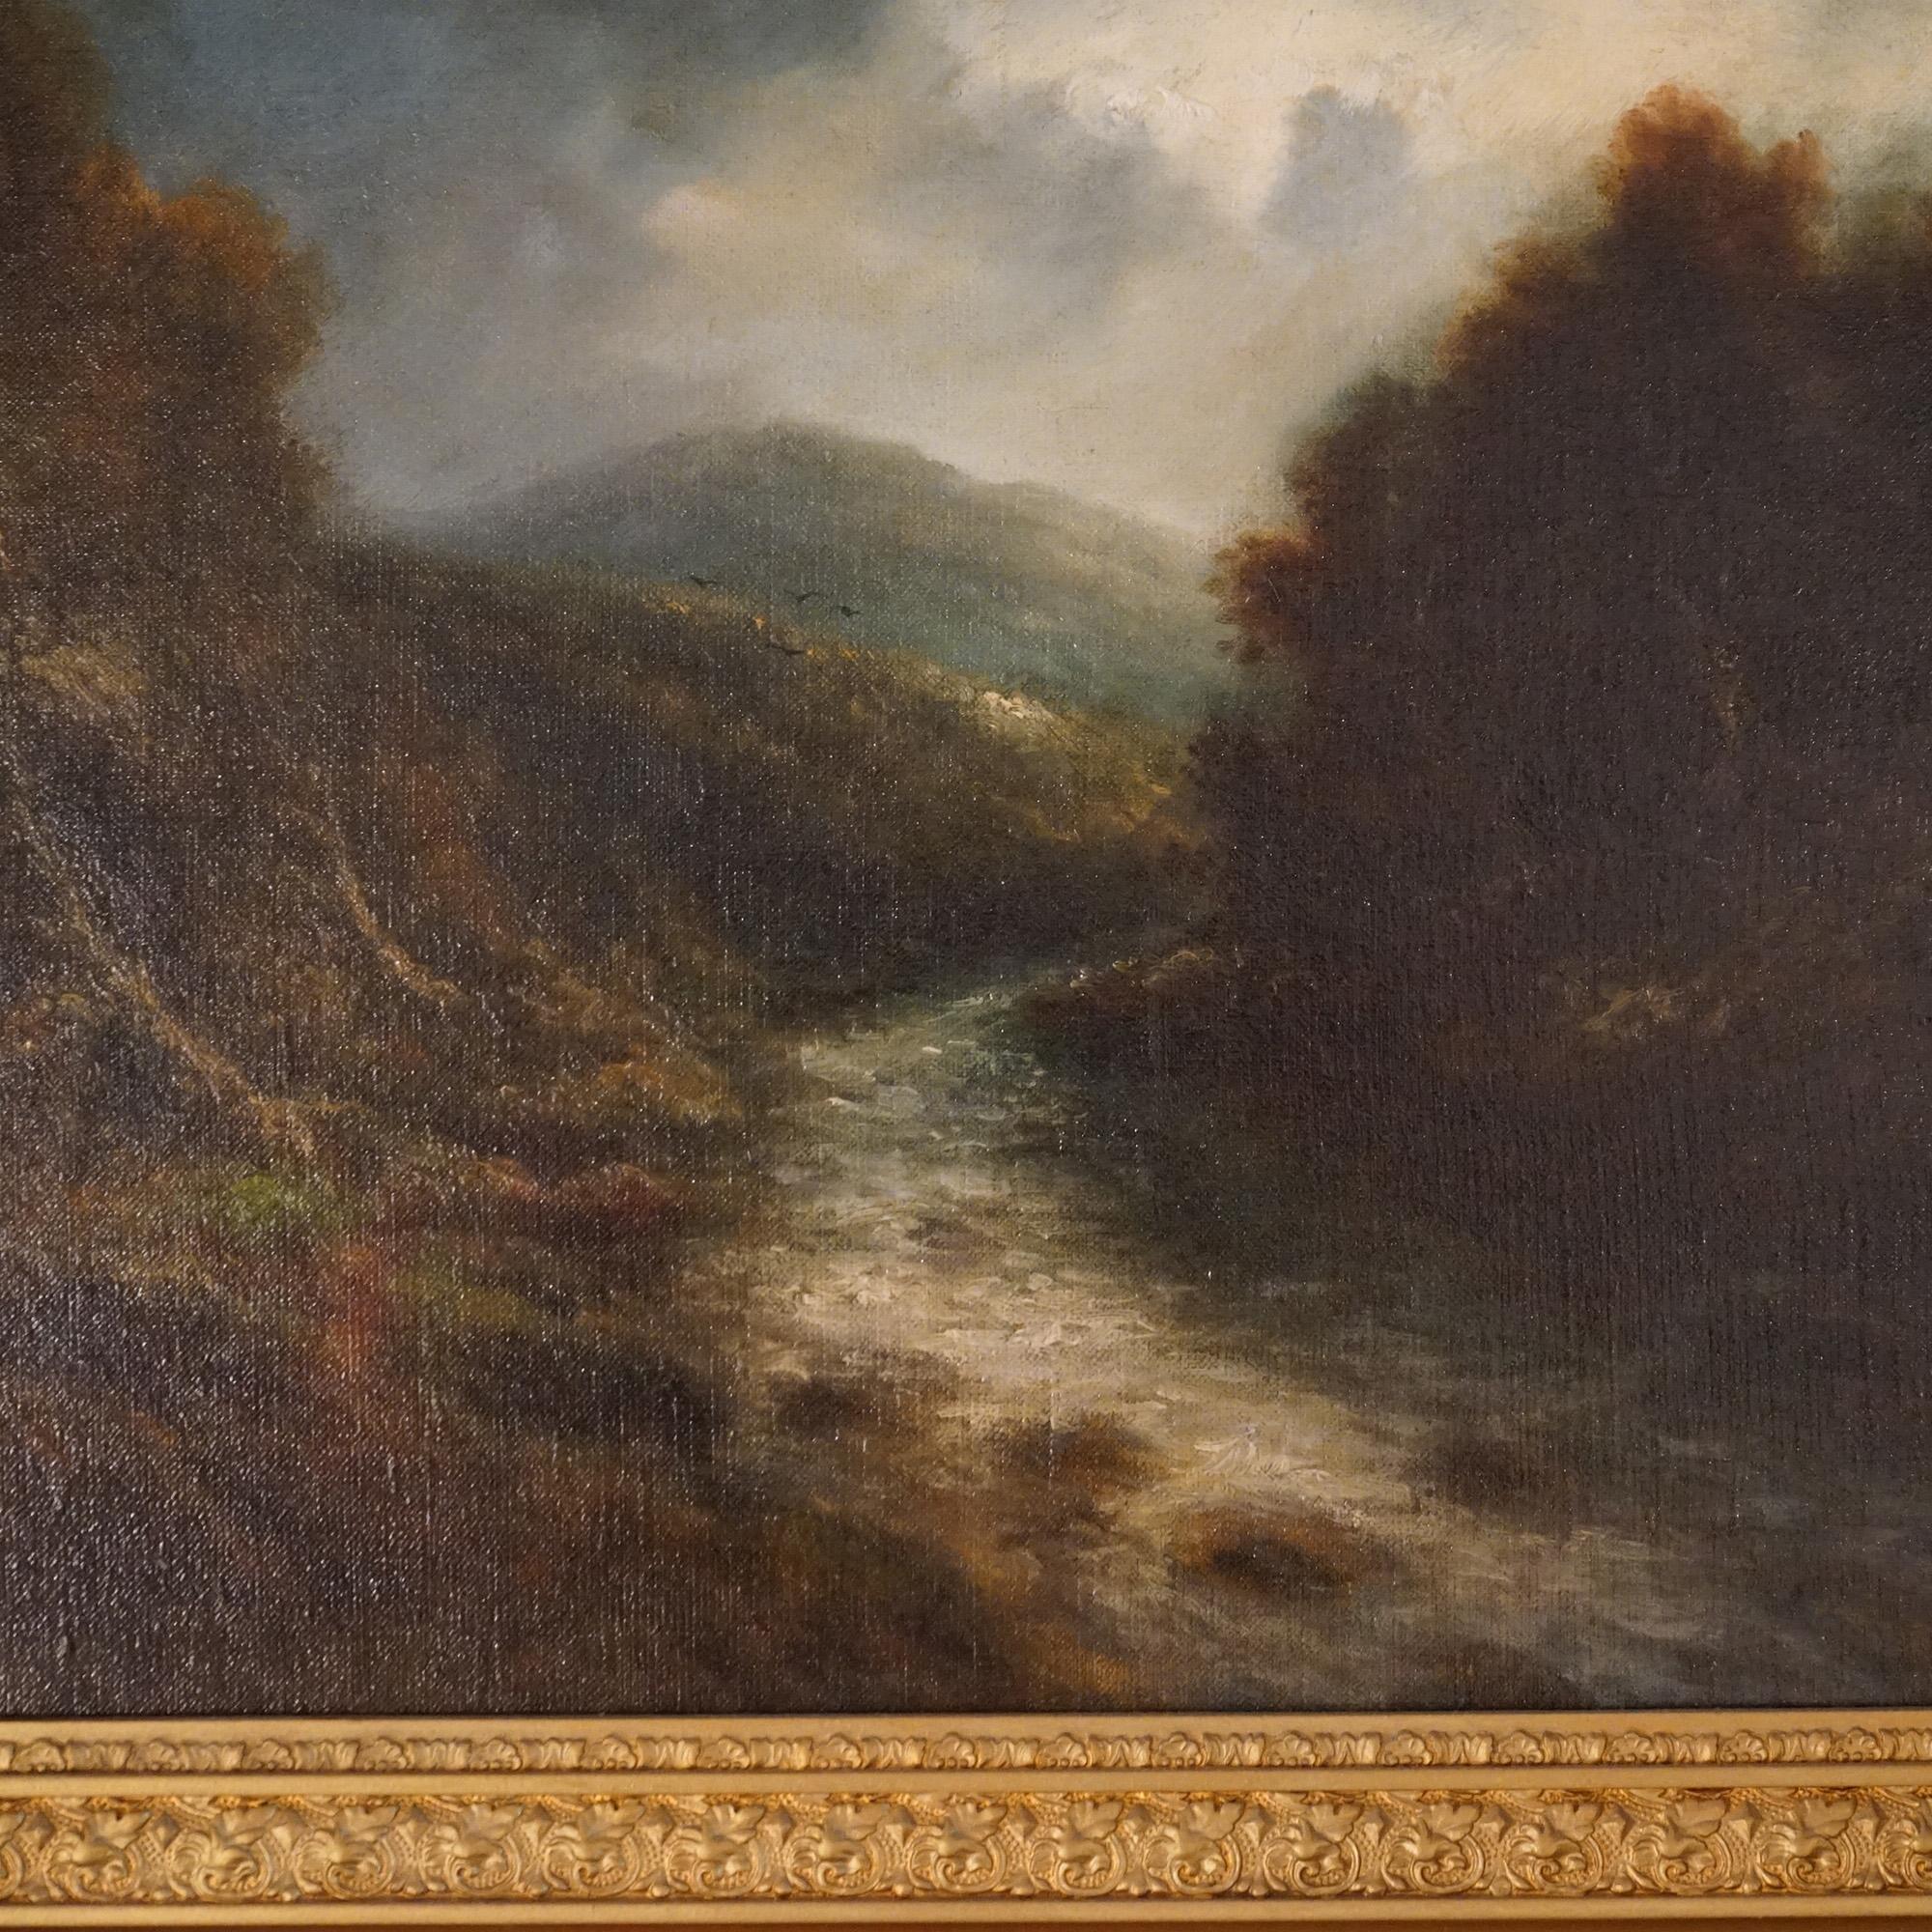 An antique Hudson River School painting by T.B. Griffin offers oil on canvas landscape scene with valley stream, signed lower left, seated in elaborate giltwood frame, 19th century

Measures - overall 29